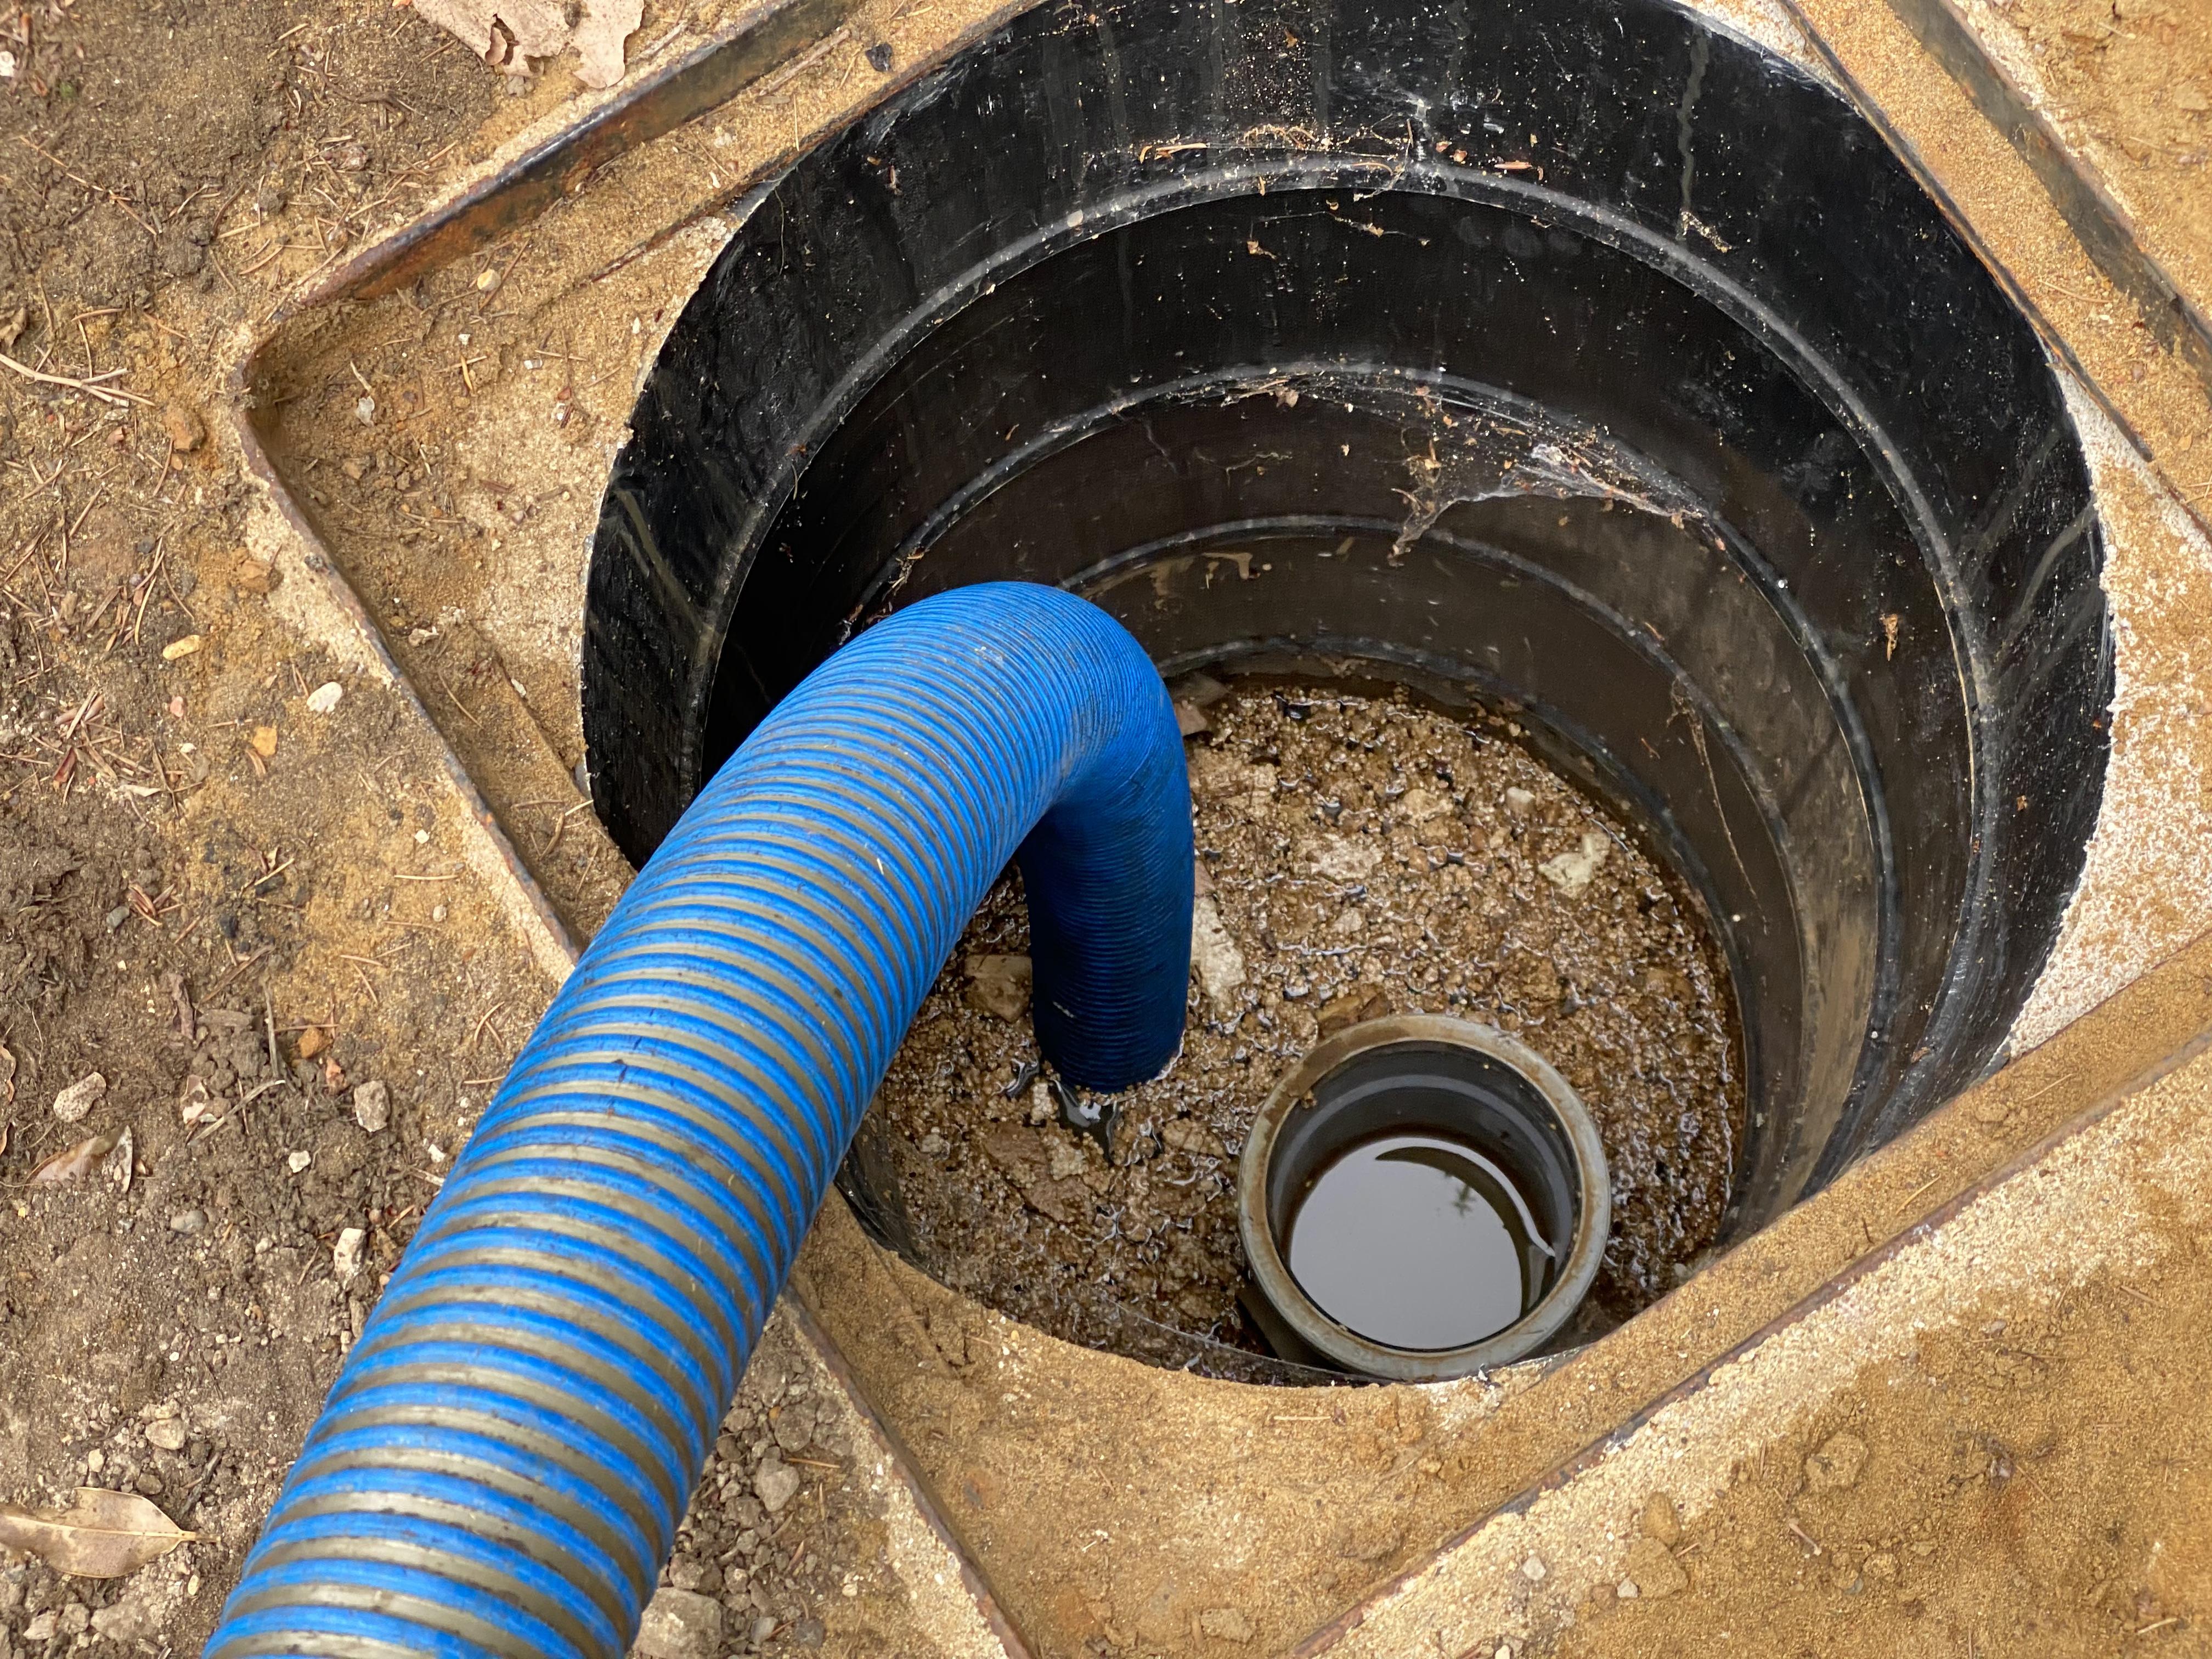 Septic tank inspection chamber